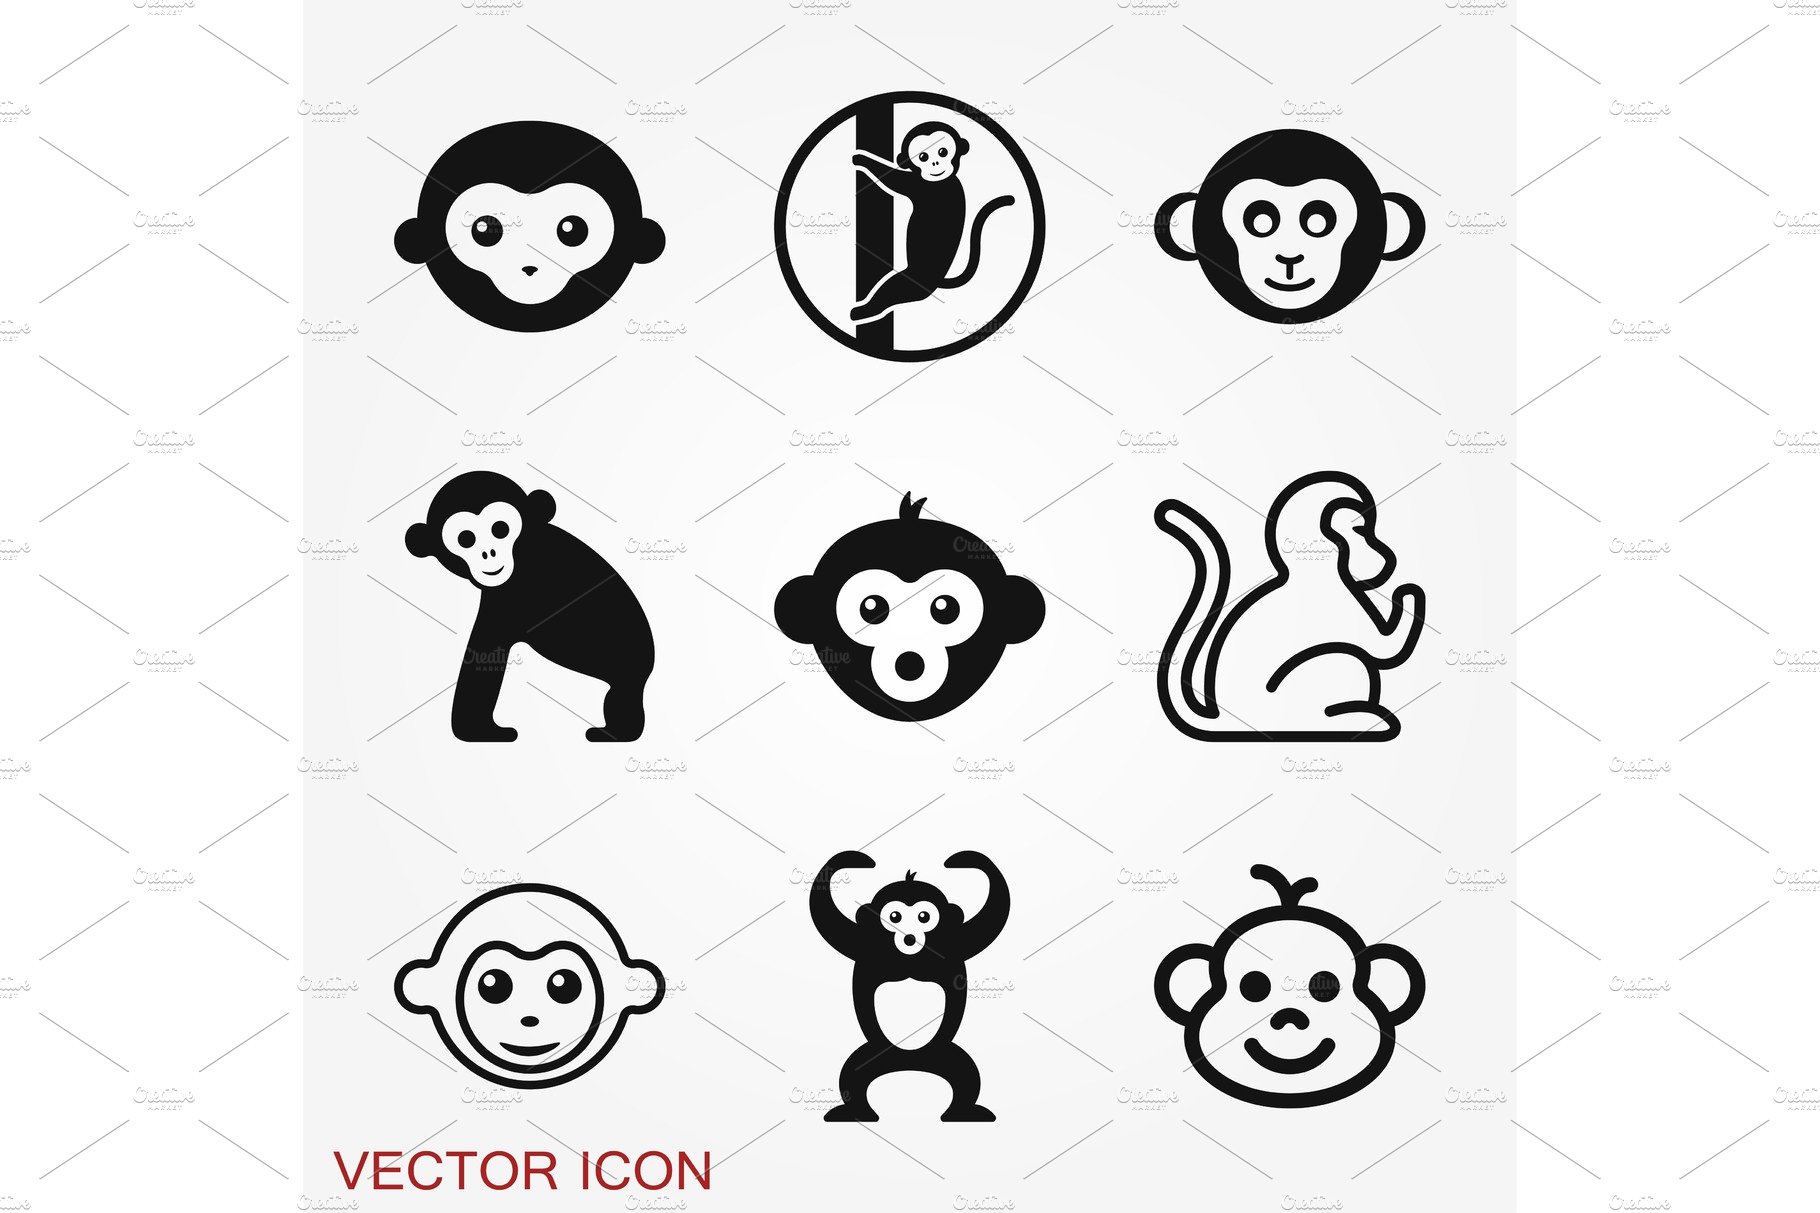 Vector monkey icon isolated on cover image.